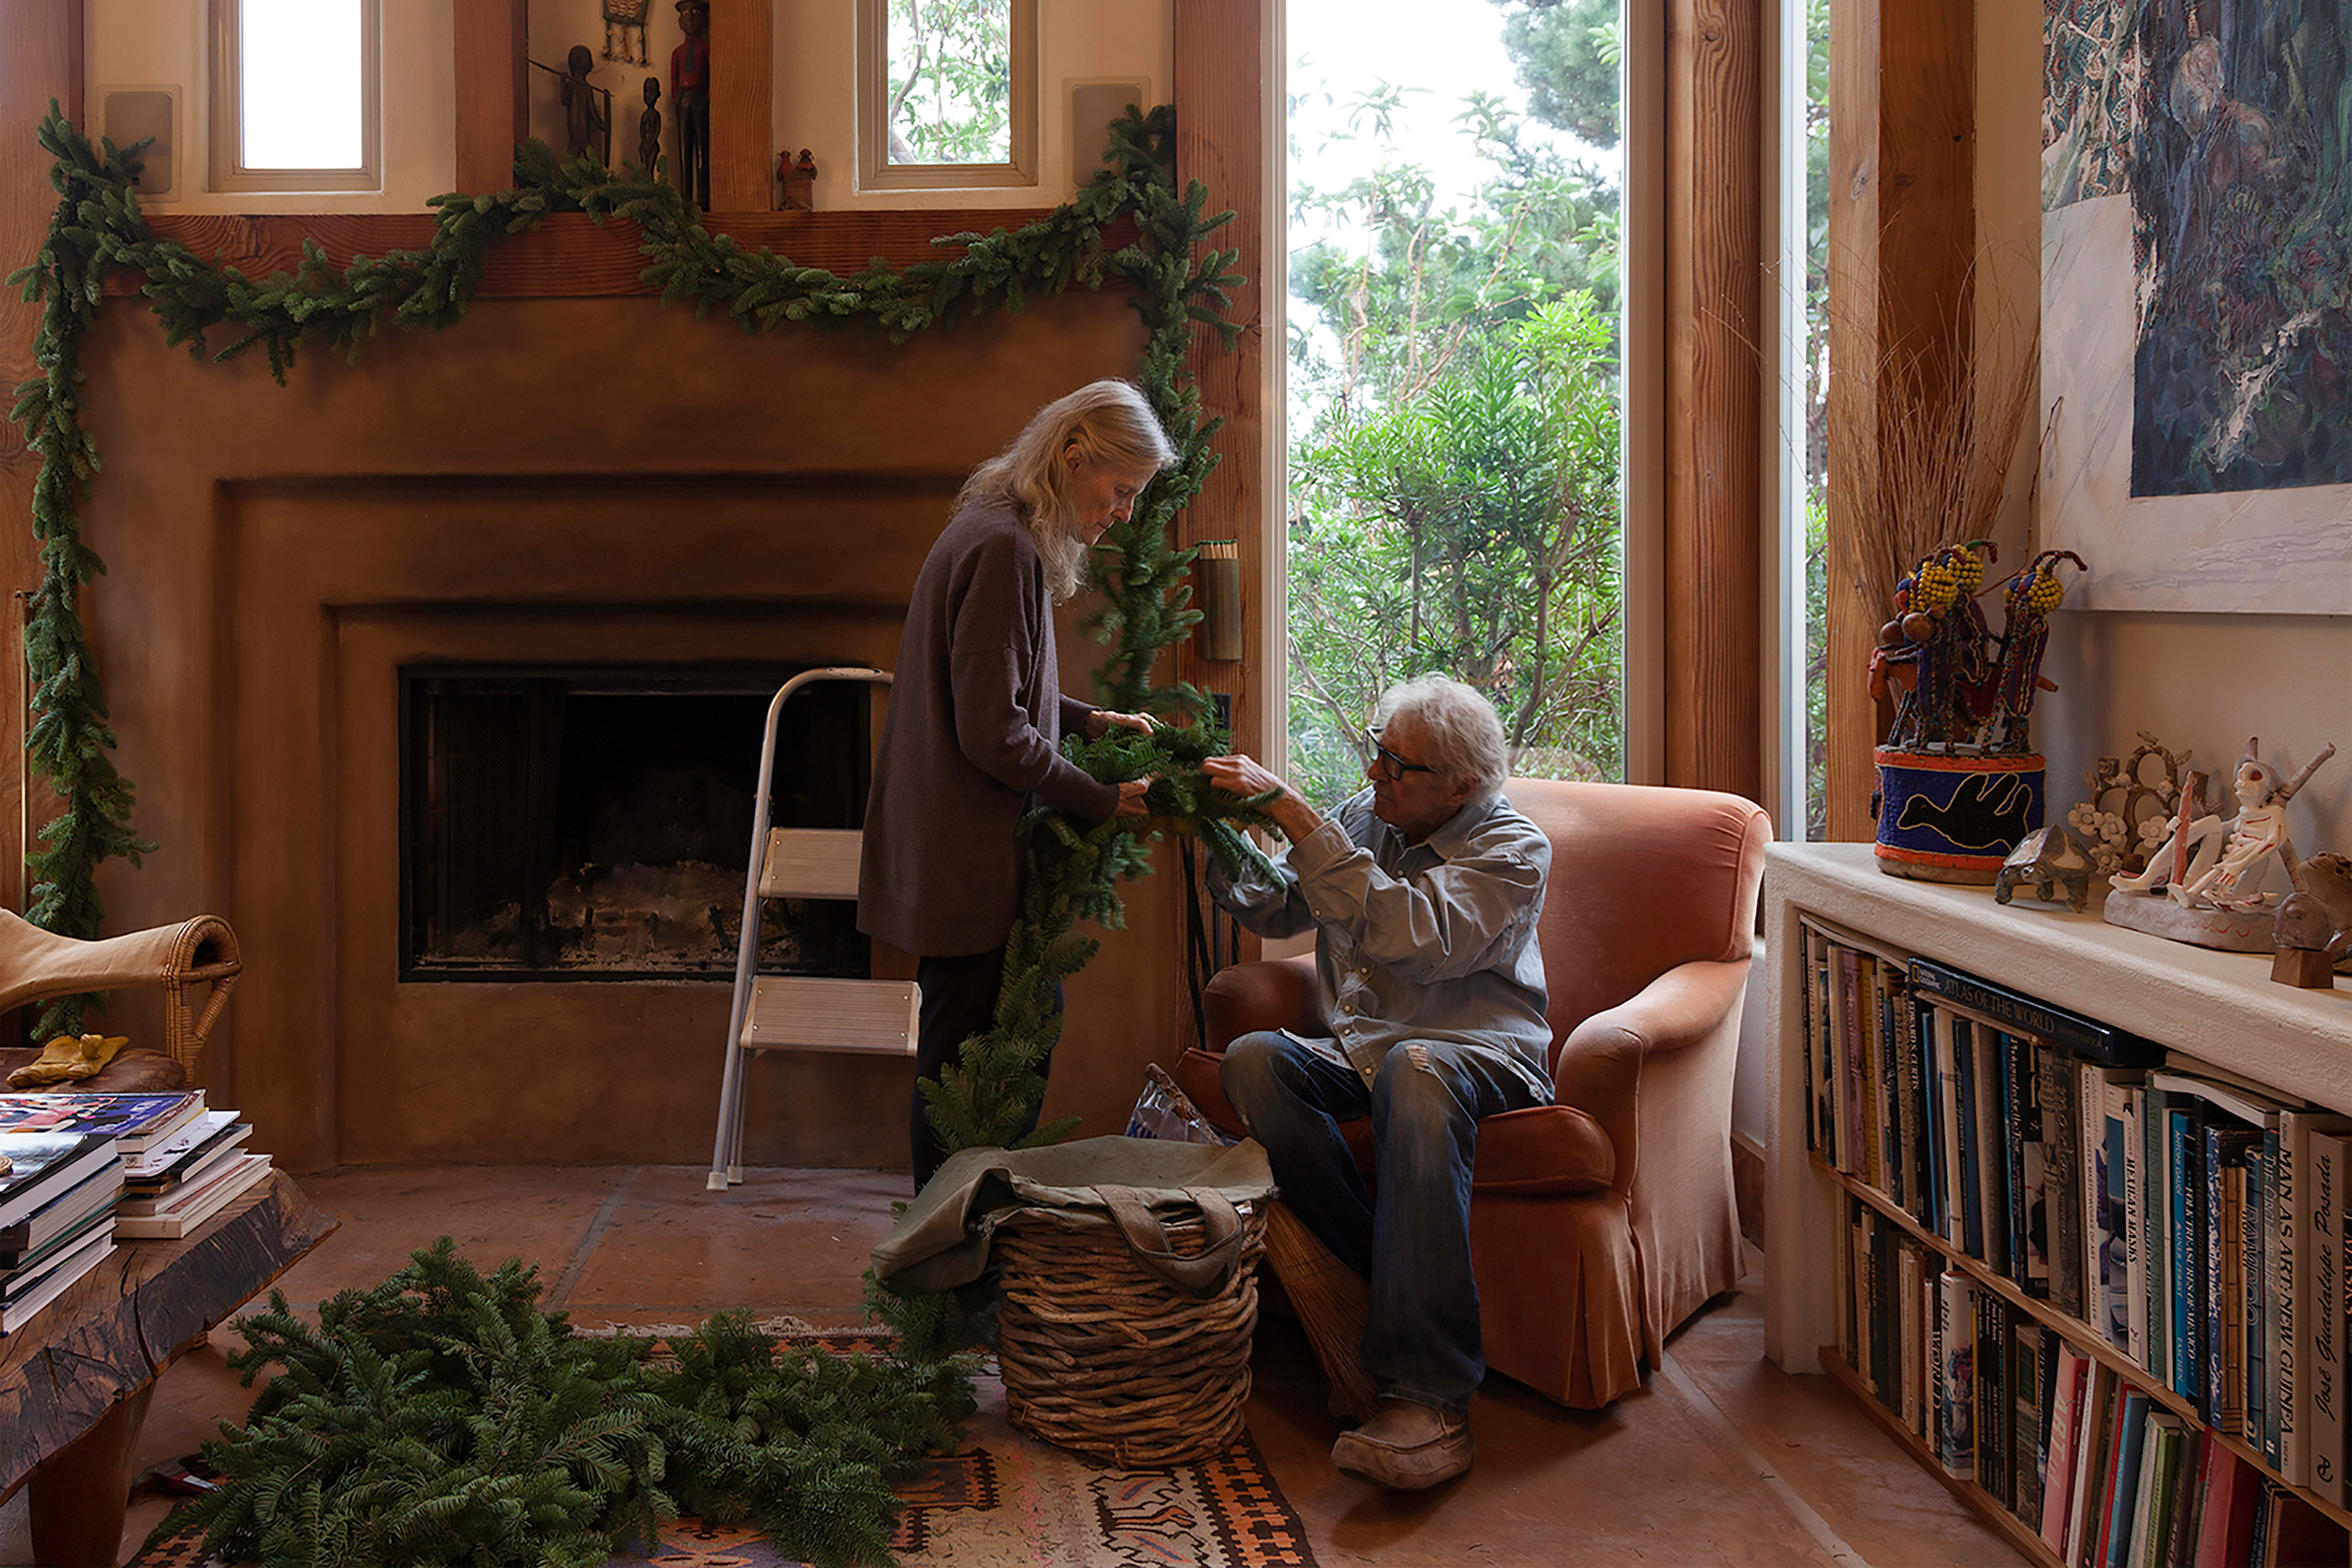 A photo shows Marna Clarke and Igor Sazevich together, hanging a garland around their house.